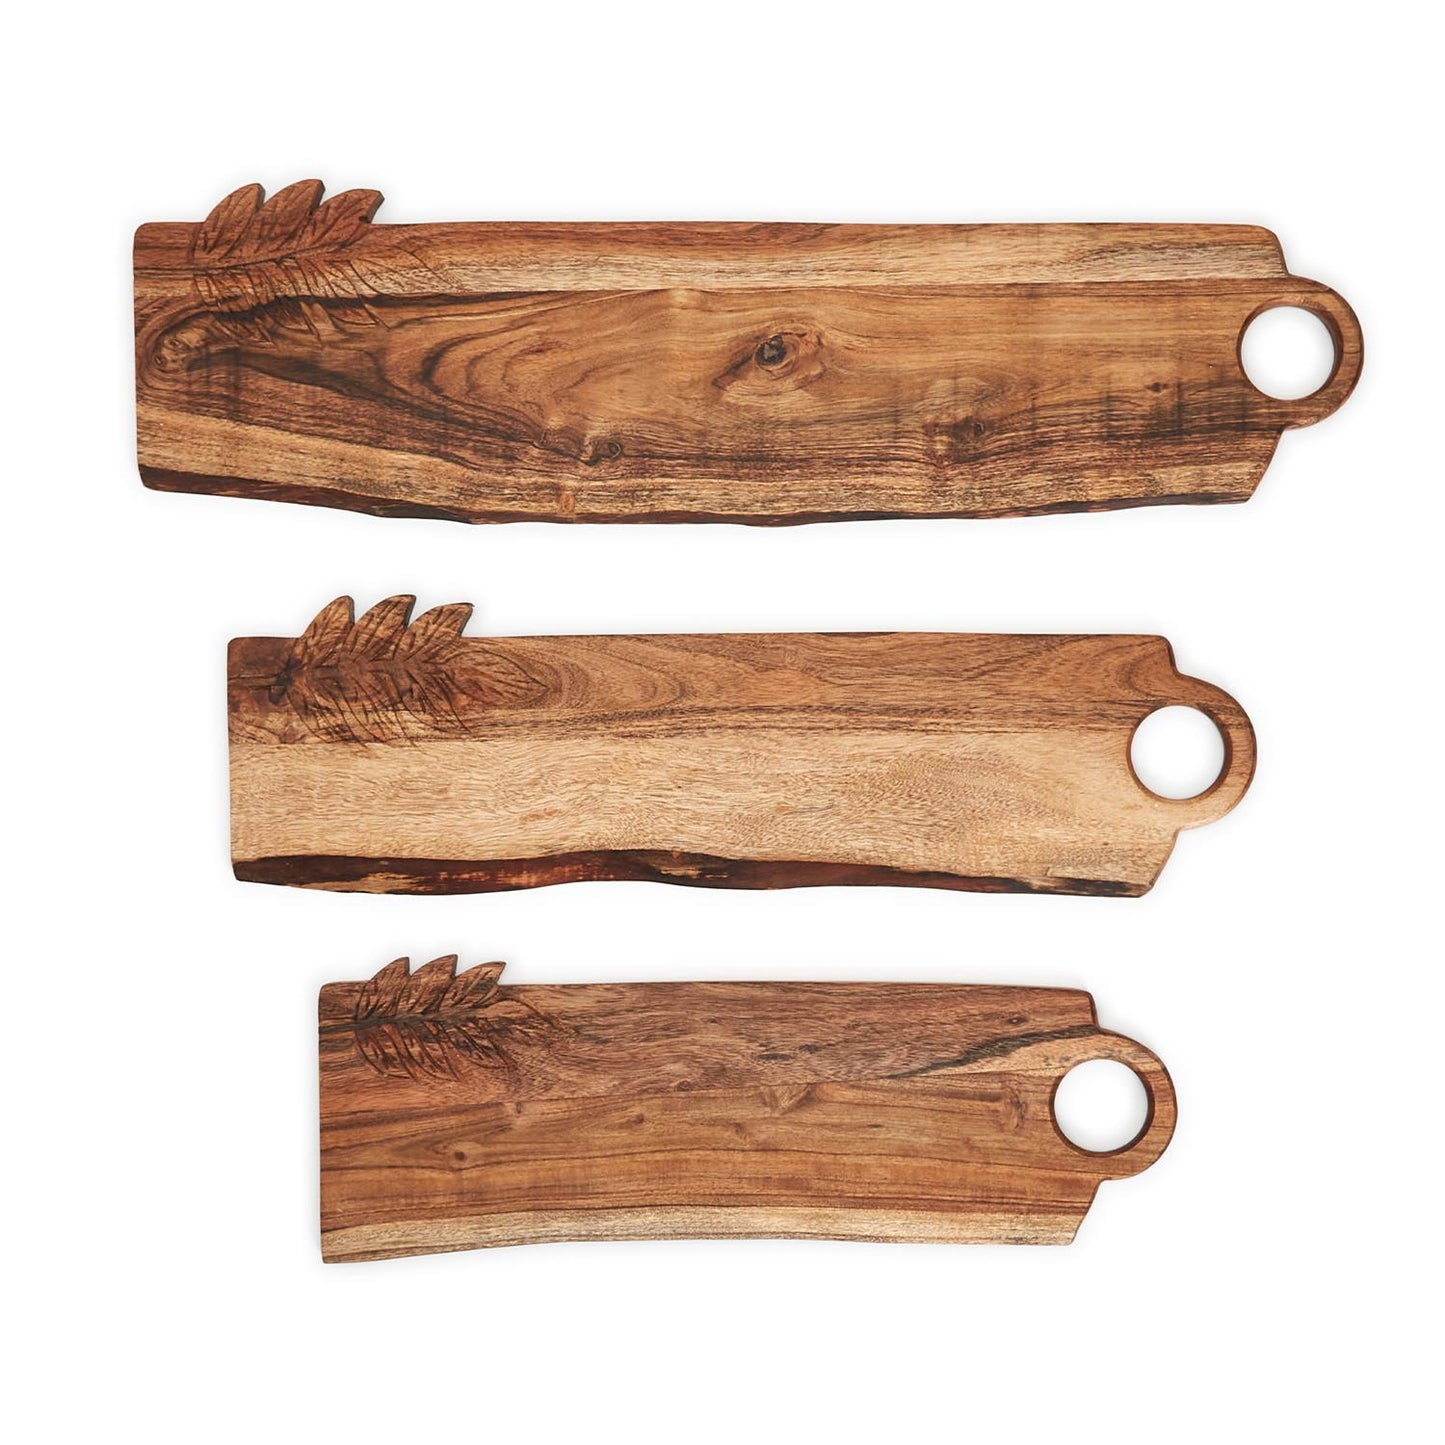 Two's Company Set of 3 Hand-Crafted Charcuterie Serving Boards w/ Leaf Design